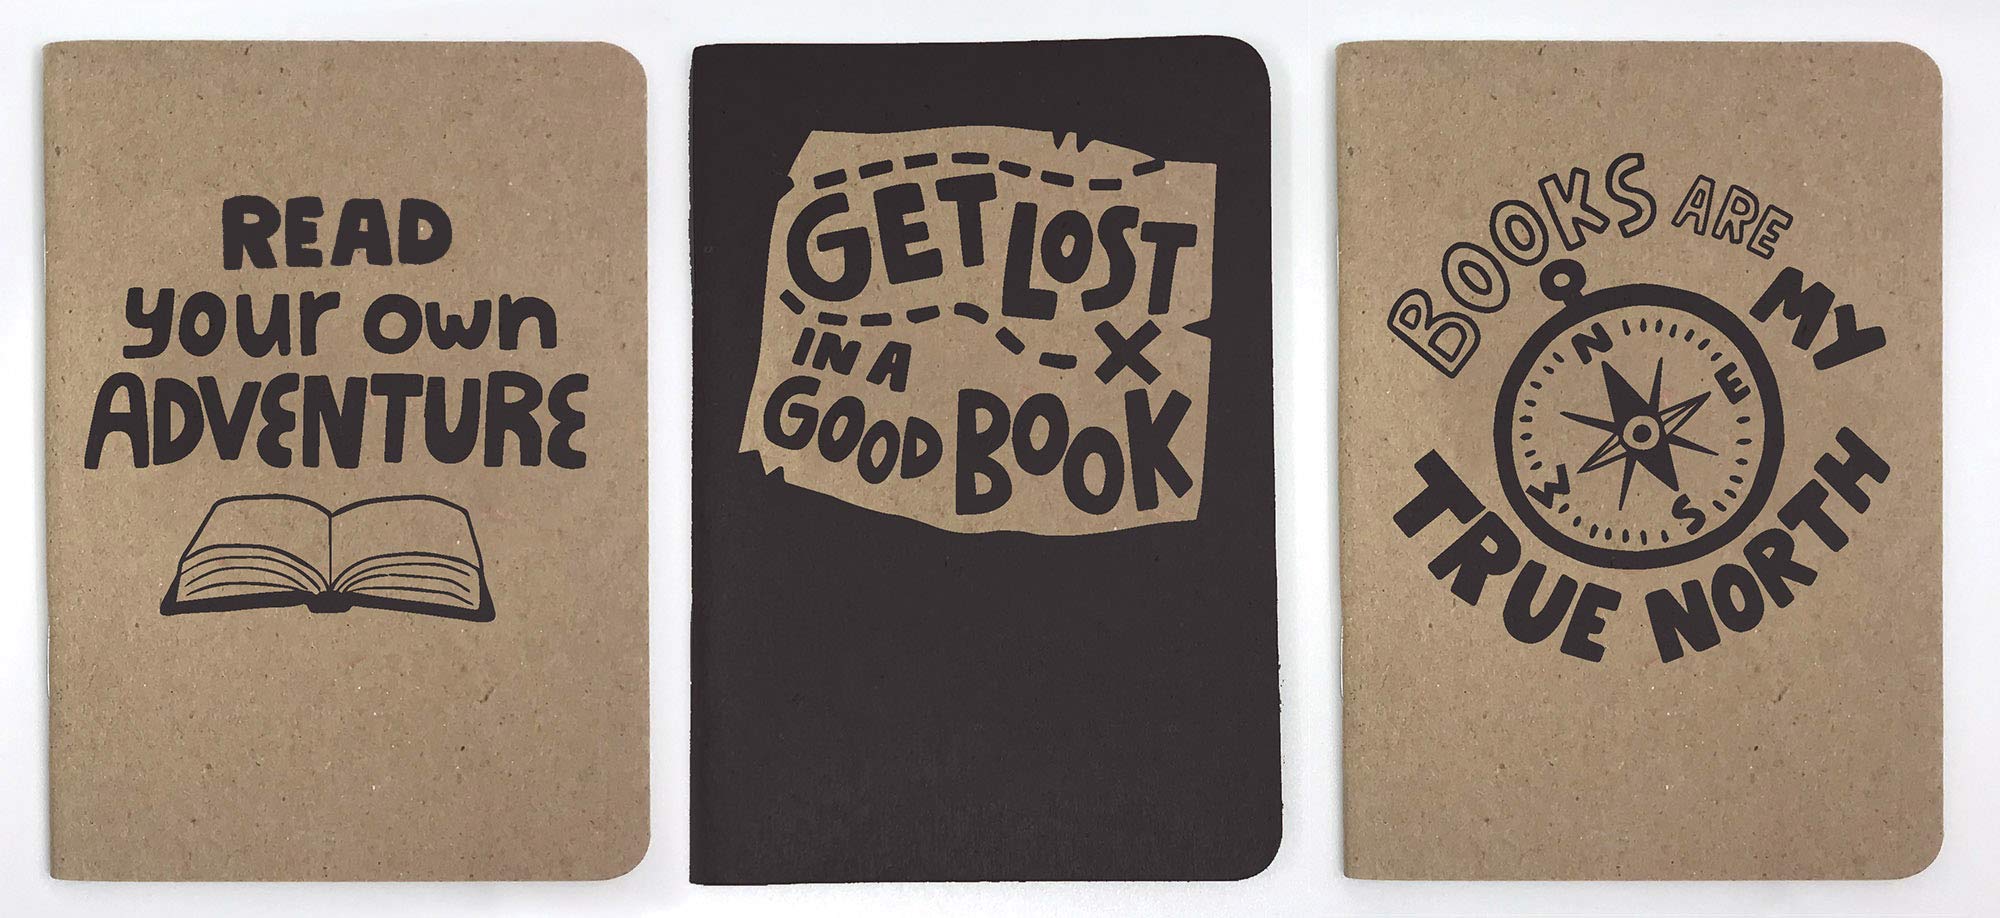 Get Lost In a Good Book 3-pack (Notebooks)